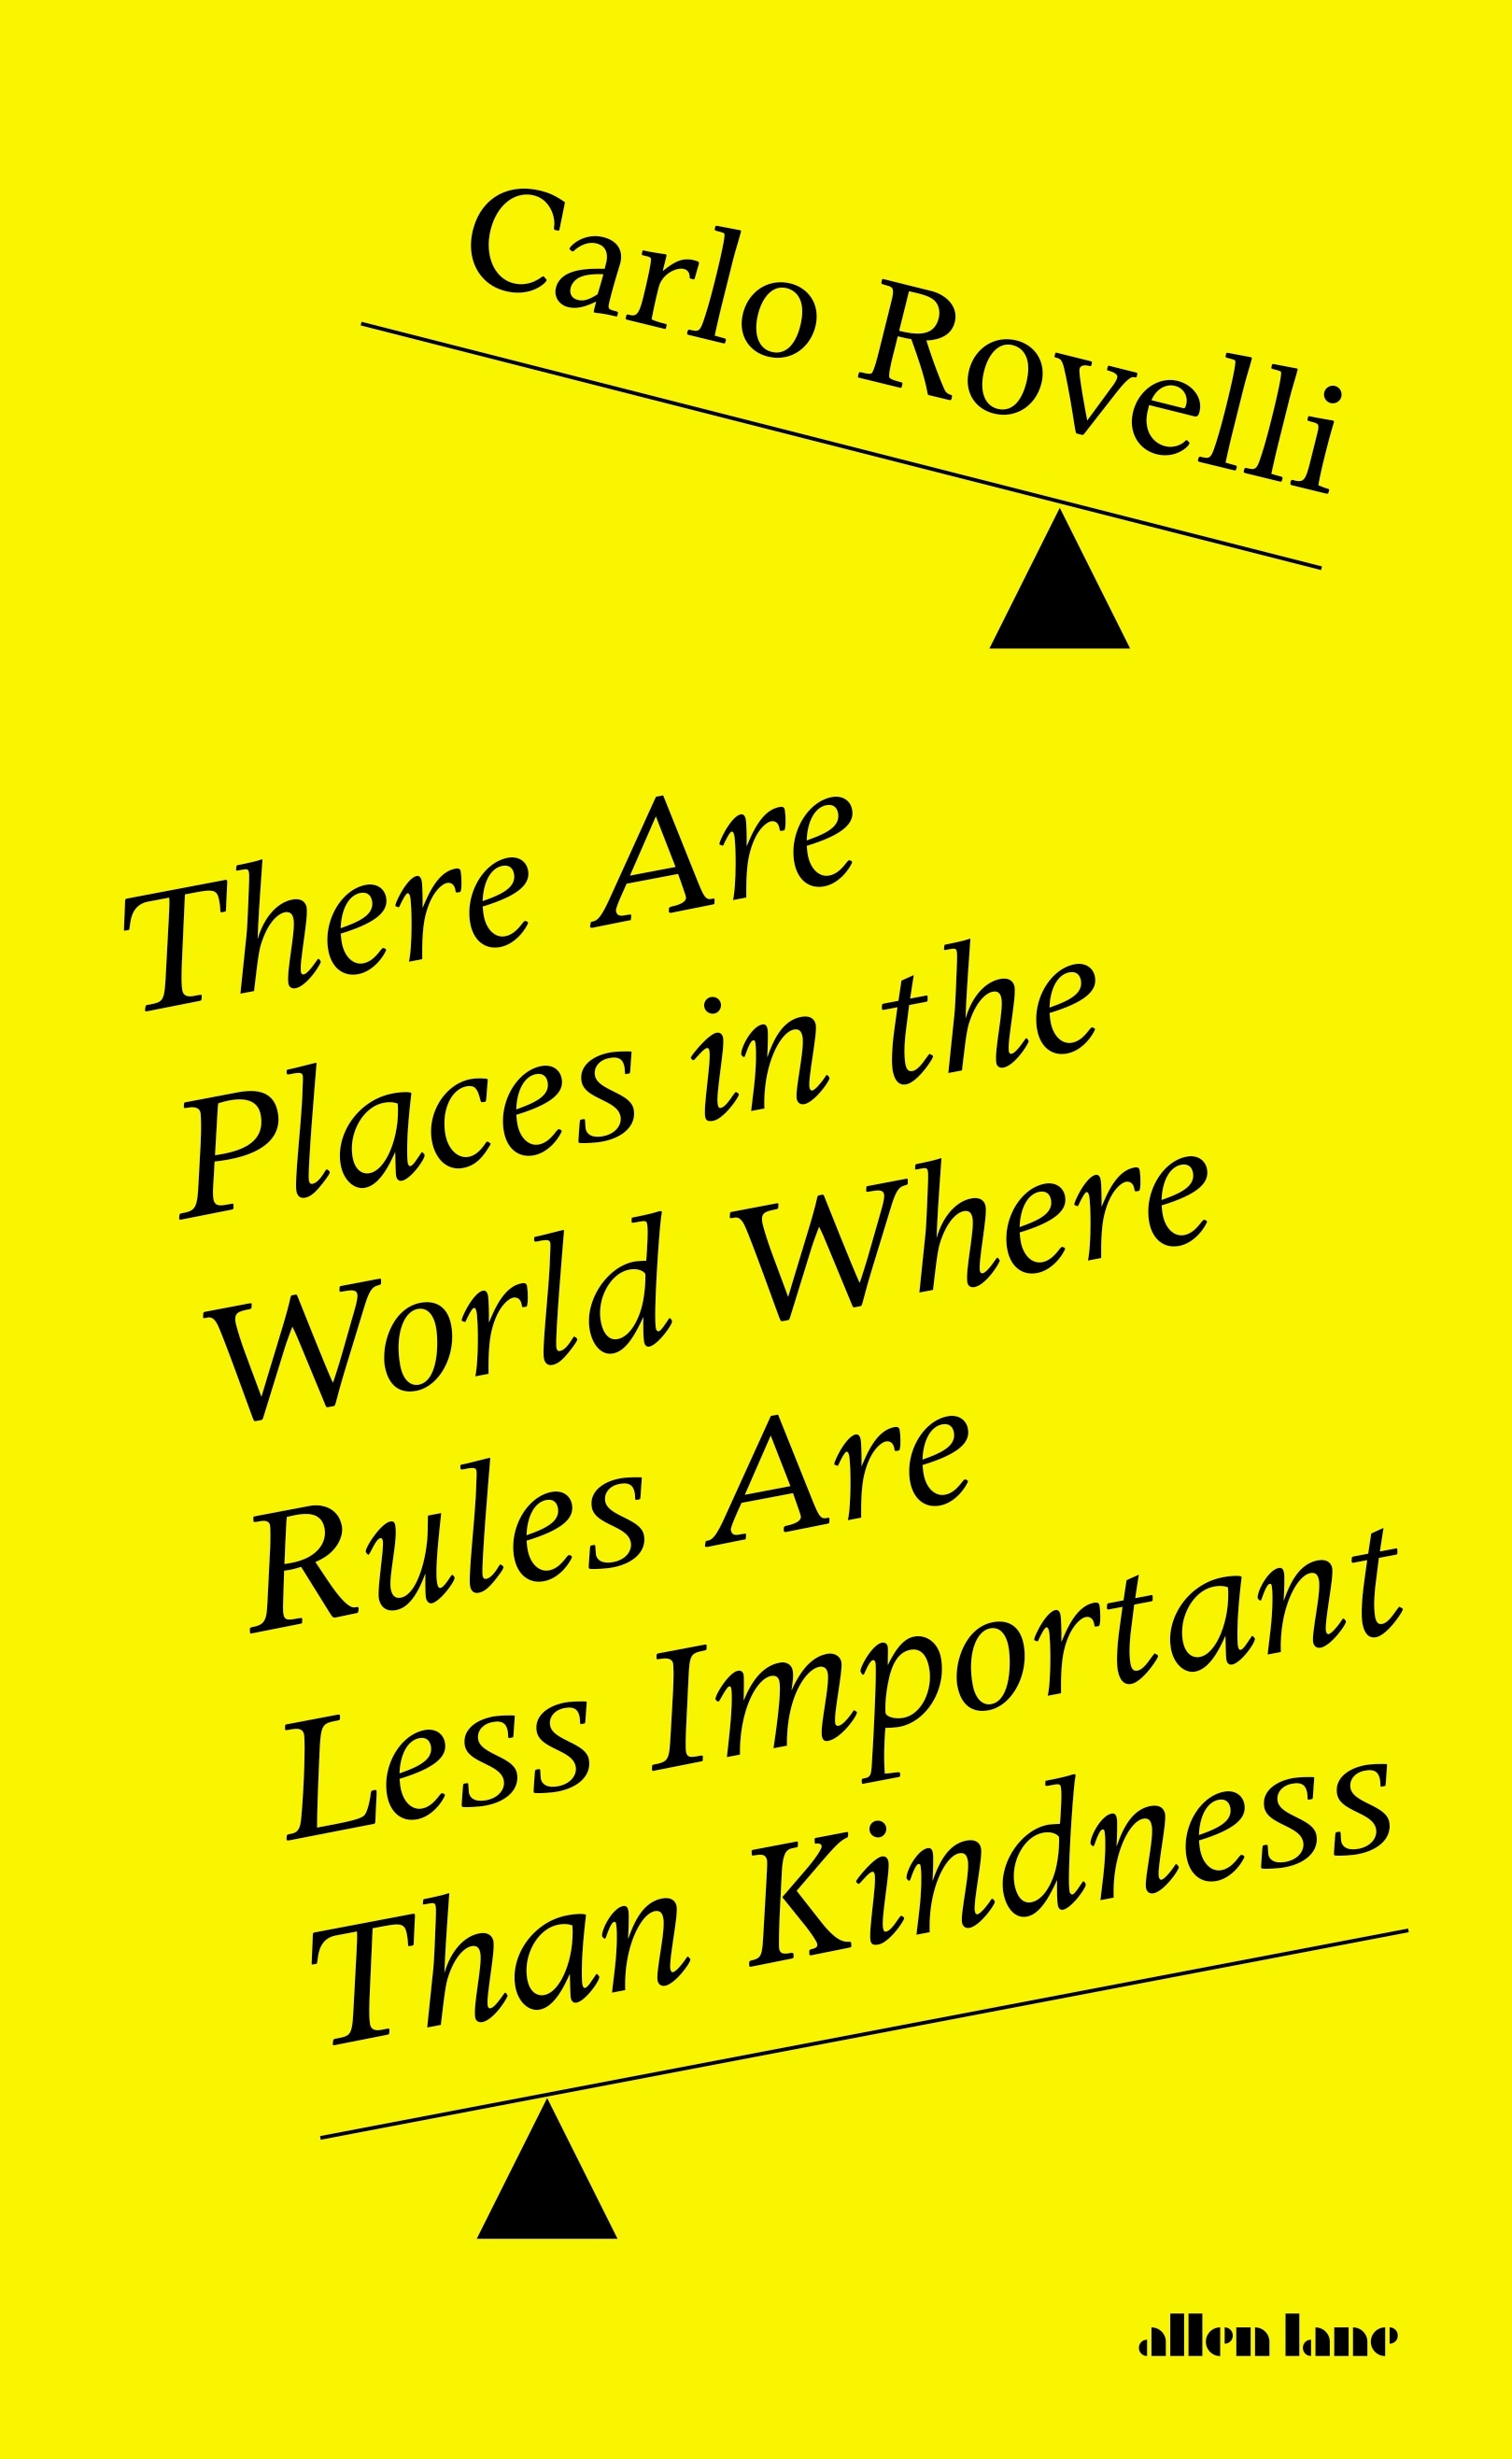 Book “There Are Places in the World Where Rules Are Less Important Than Kindness” by Carlo Rovelli — November 5, 2020